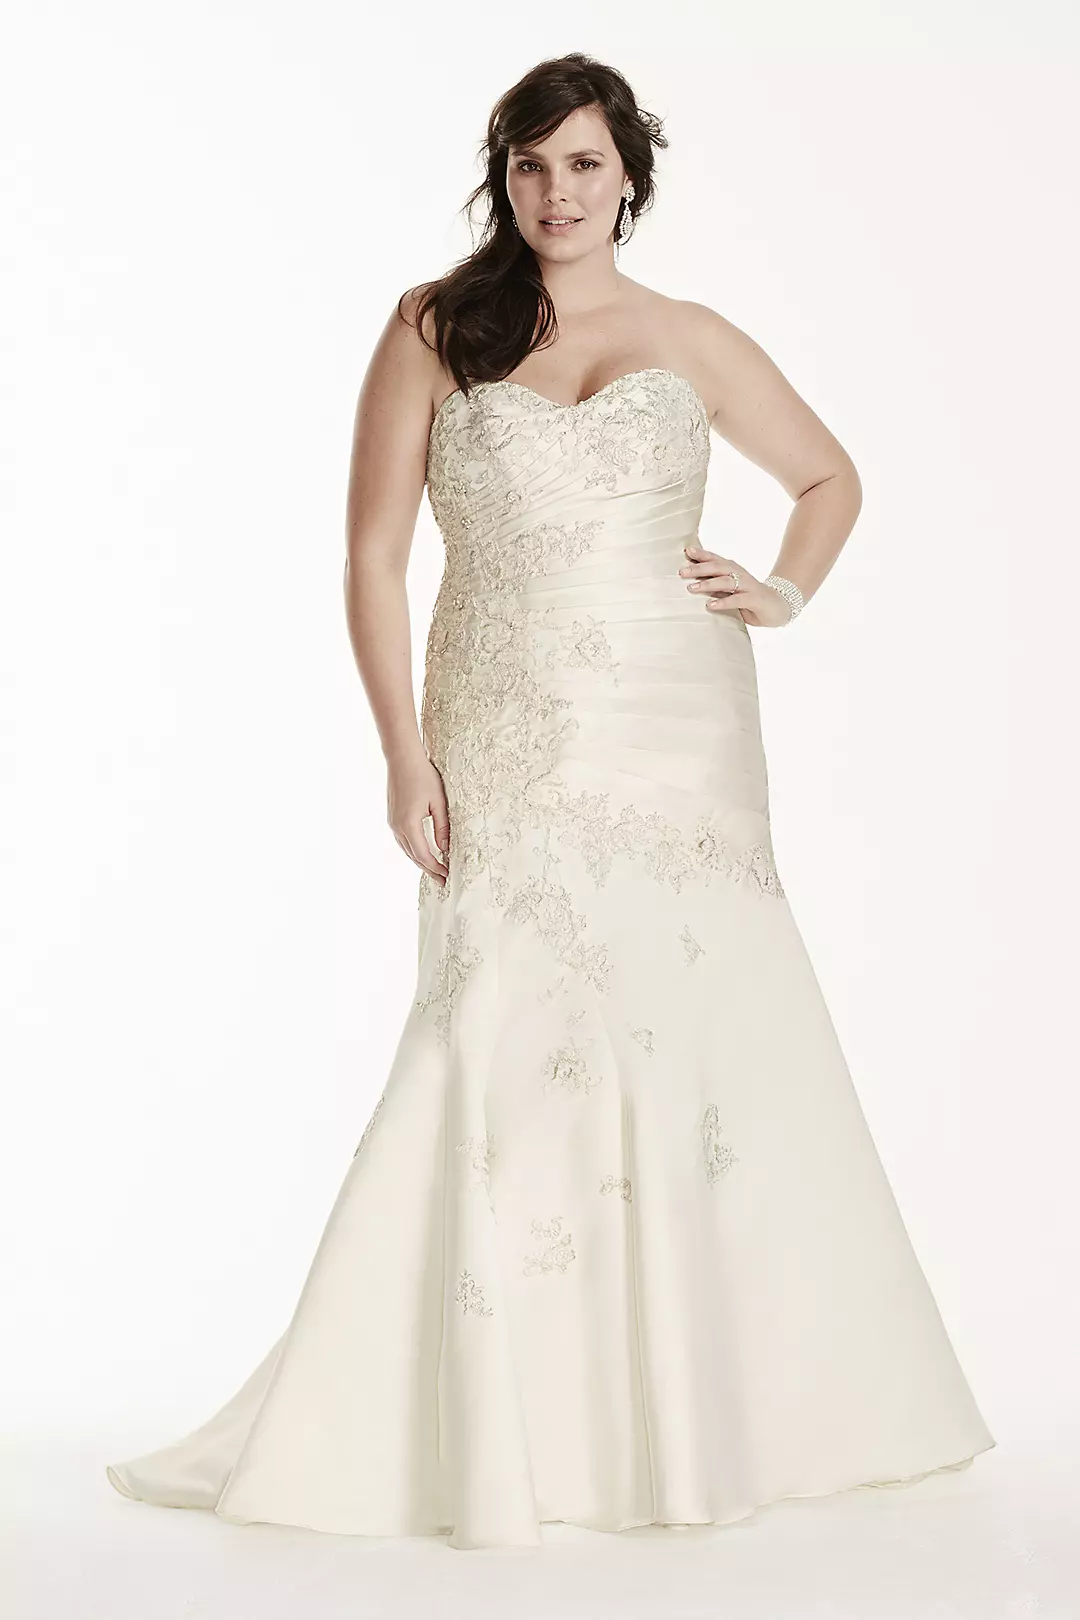 As-Is Plus Size Wedding Dress with Lace Applique Image